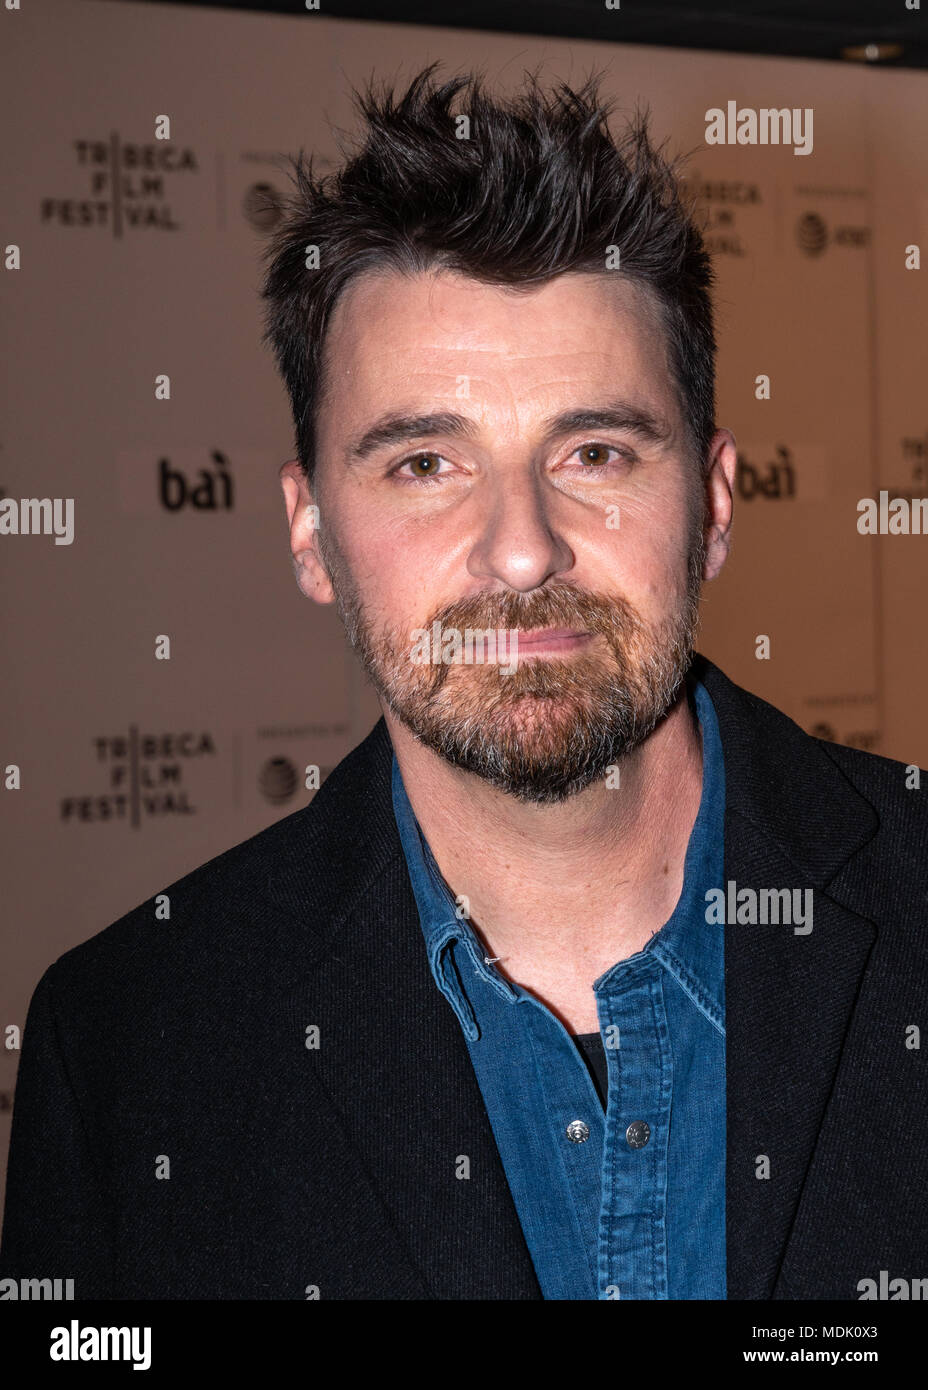 New York, USA, 19 April 2018. Spanish director Ramón Salazar Hoogers arrives at the 2018 Tribeca Film Festival premiere of his film 'Sunday's Illness' (La enfermedad del domingo) in New York city.  Photo by Enrique Shore / Alamy Live News Stock Photo